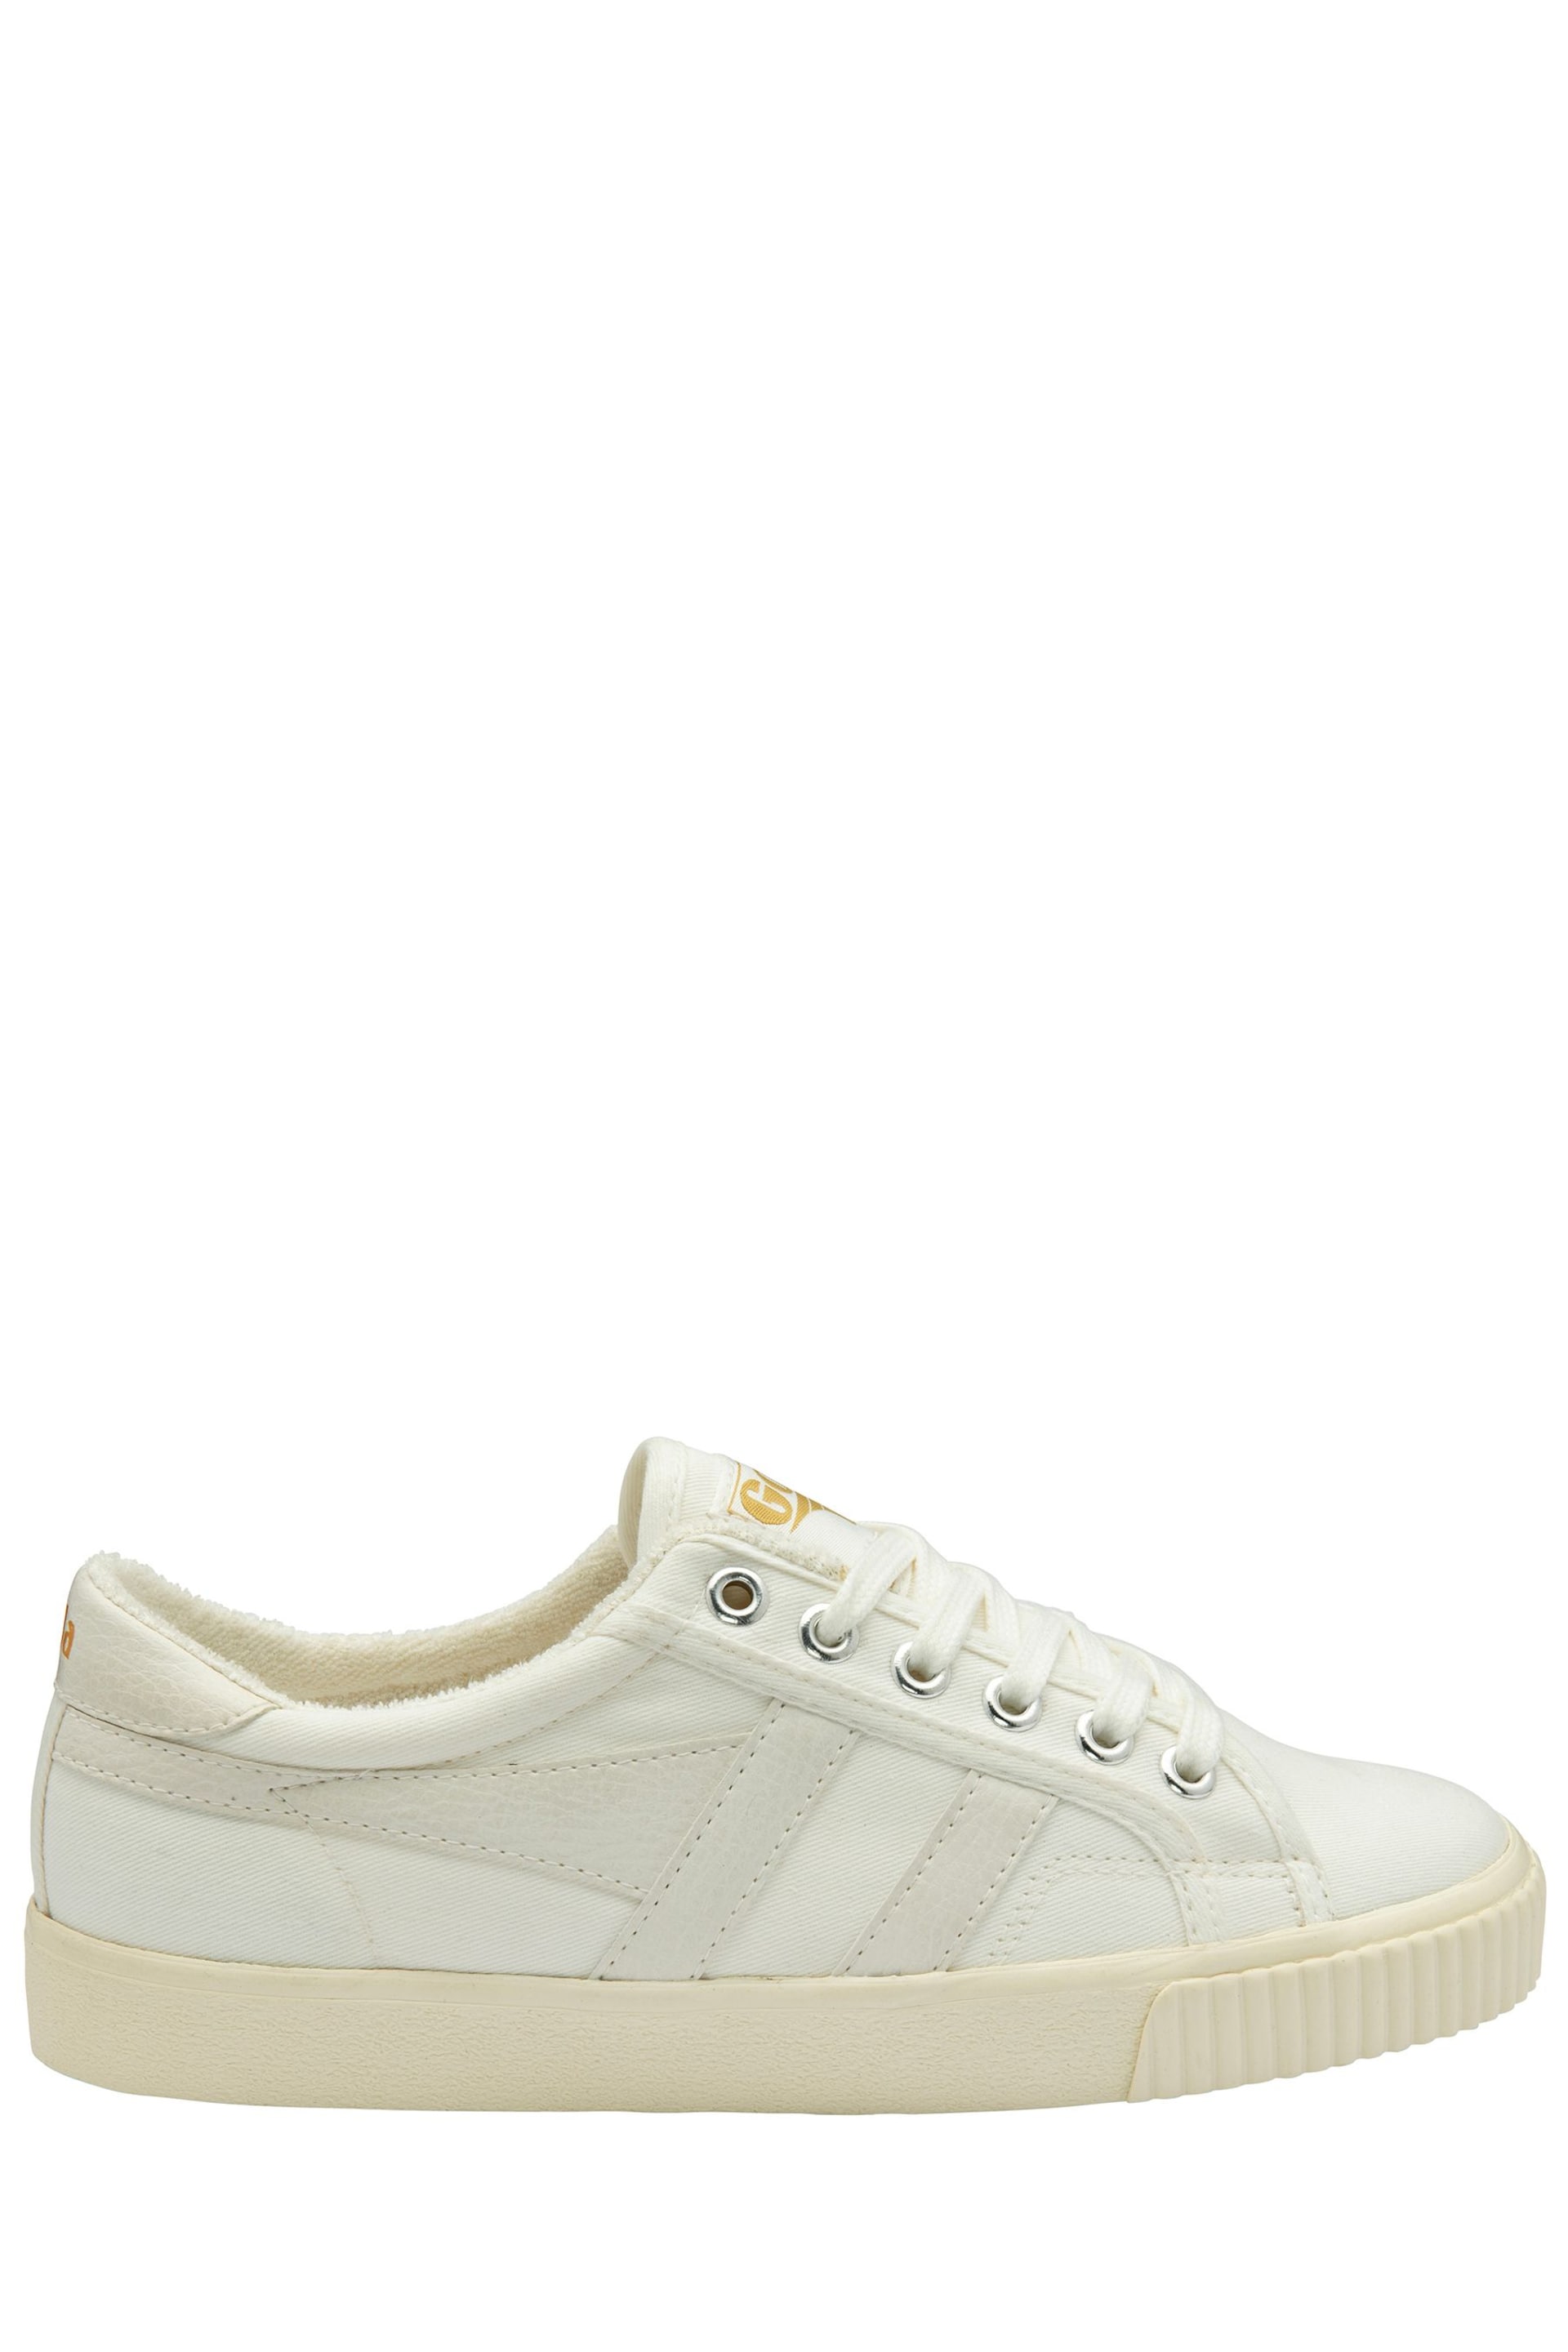 Gola White Ladies Tennis Mark Cox Canvas Lace-Up Trainers - Image 1 of 4